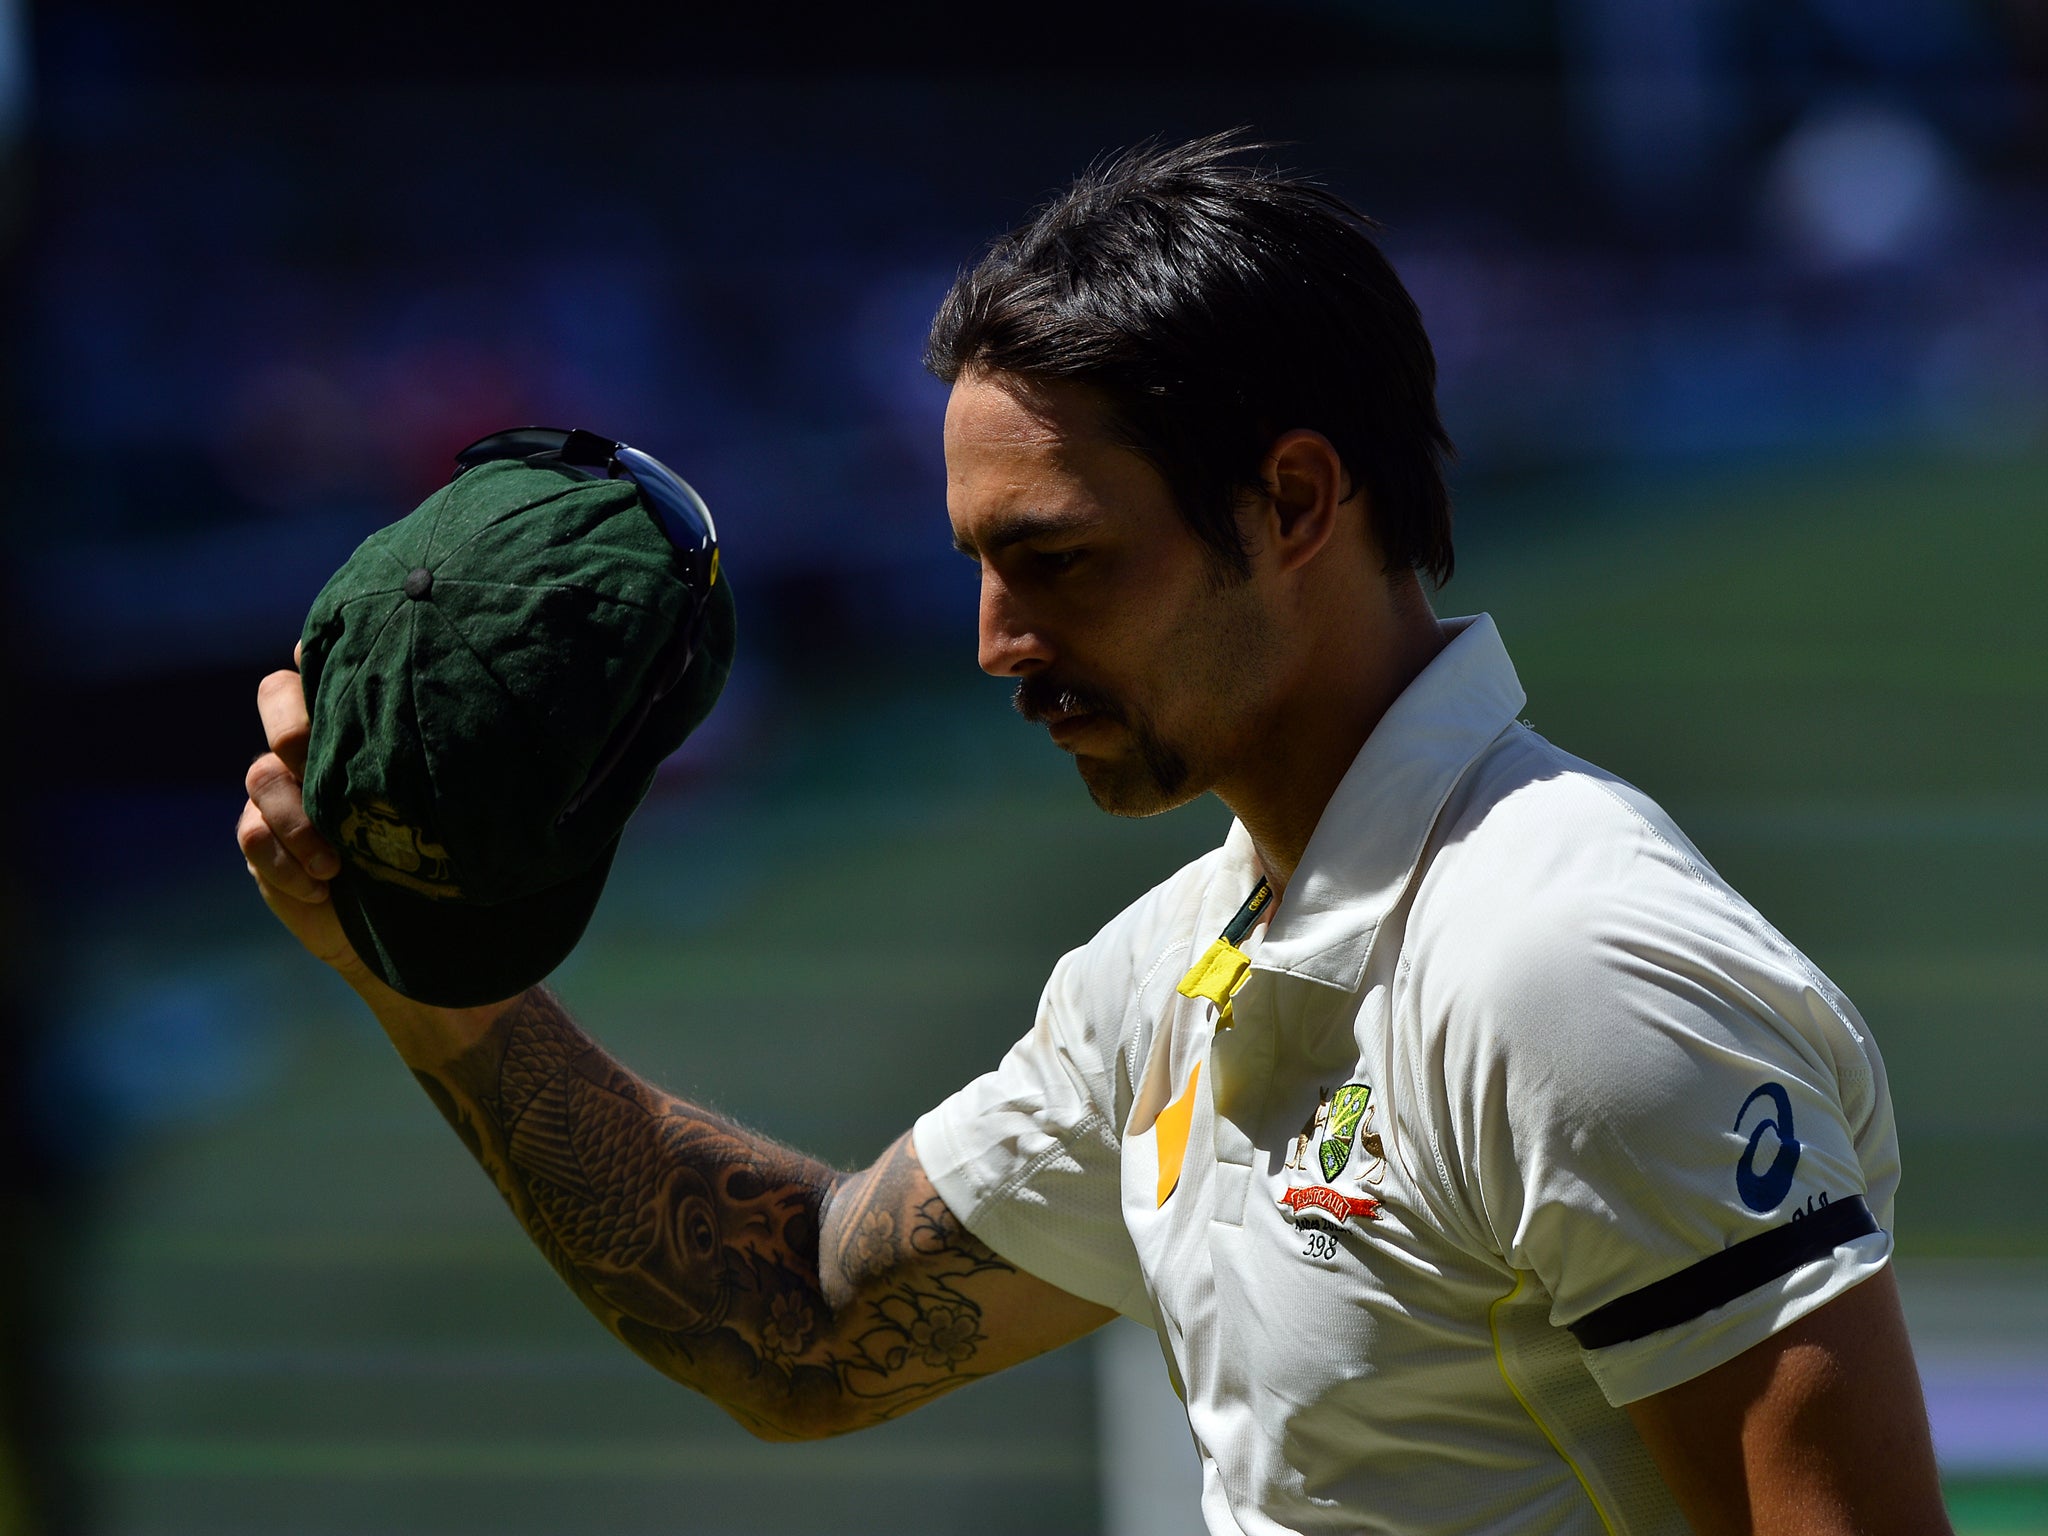 Australia bowler Mitchell Johnson destroyed England's batting line-up on day three of the Second Test